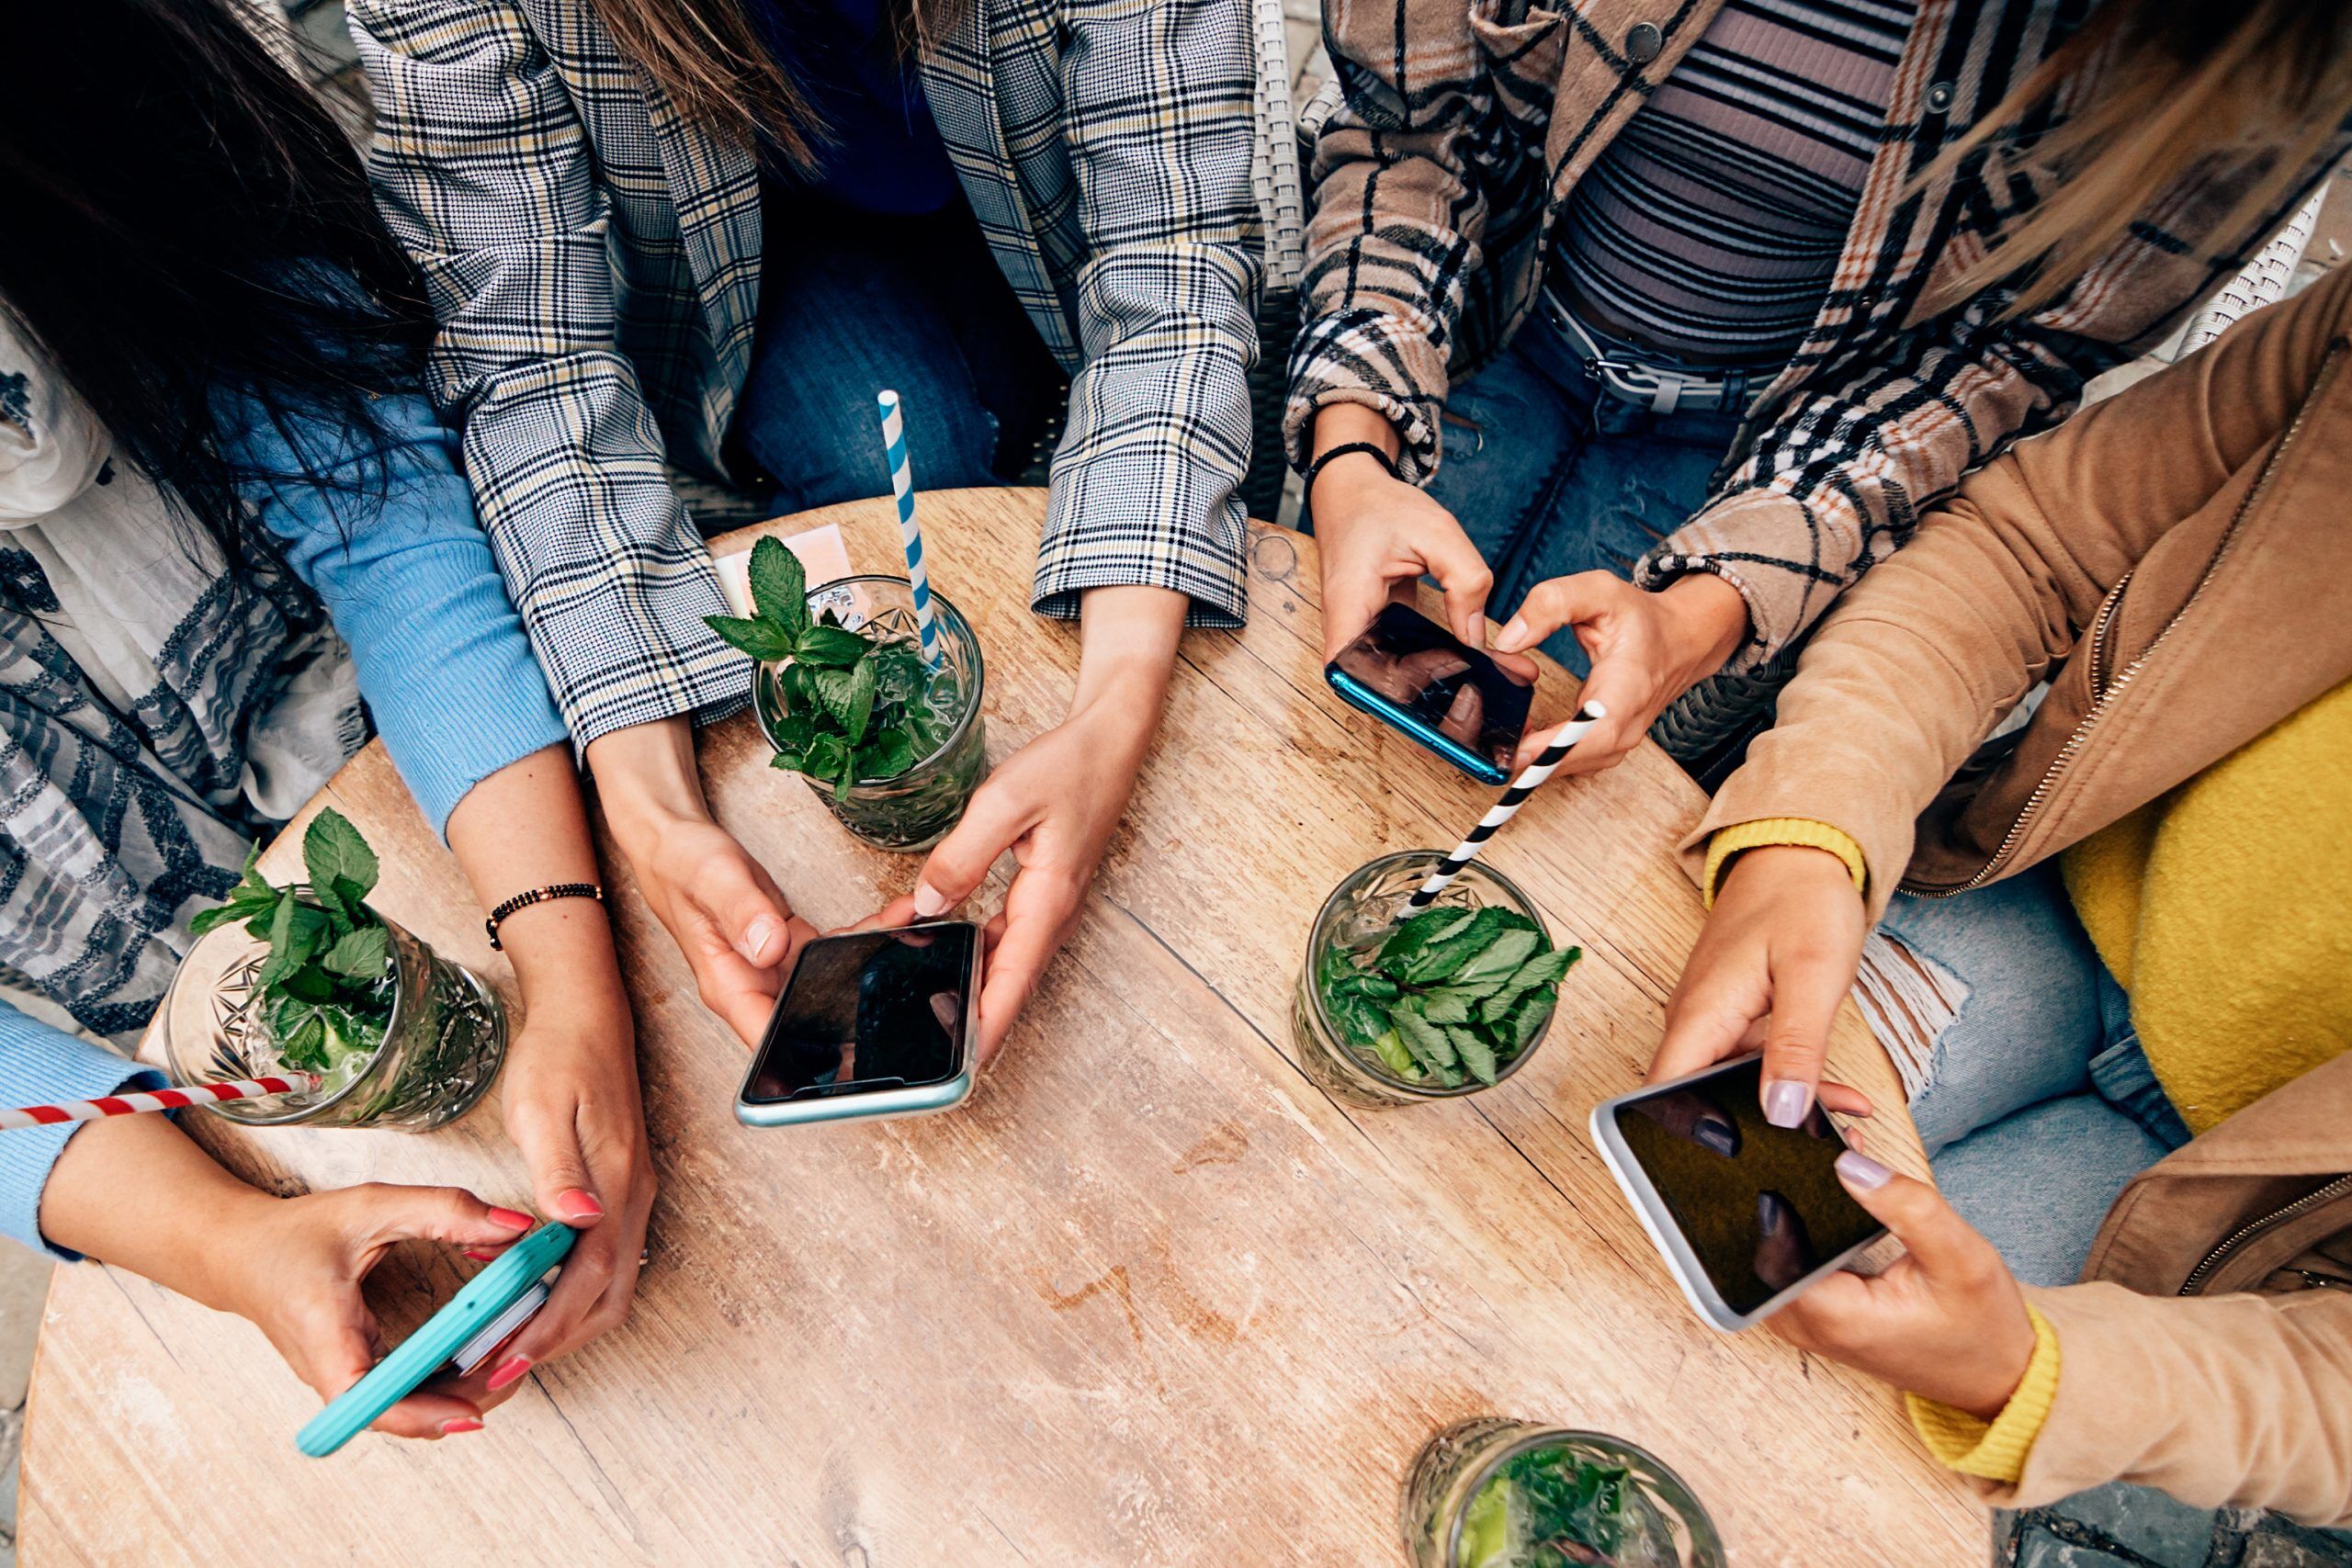 Four women sitting around a wooden table with drinks, all holding smartphones